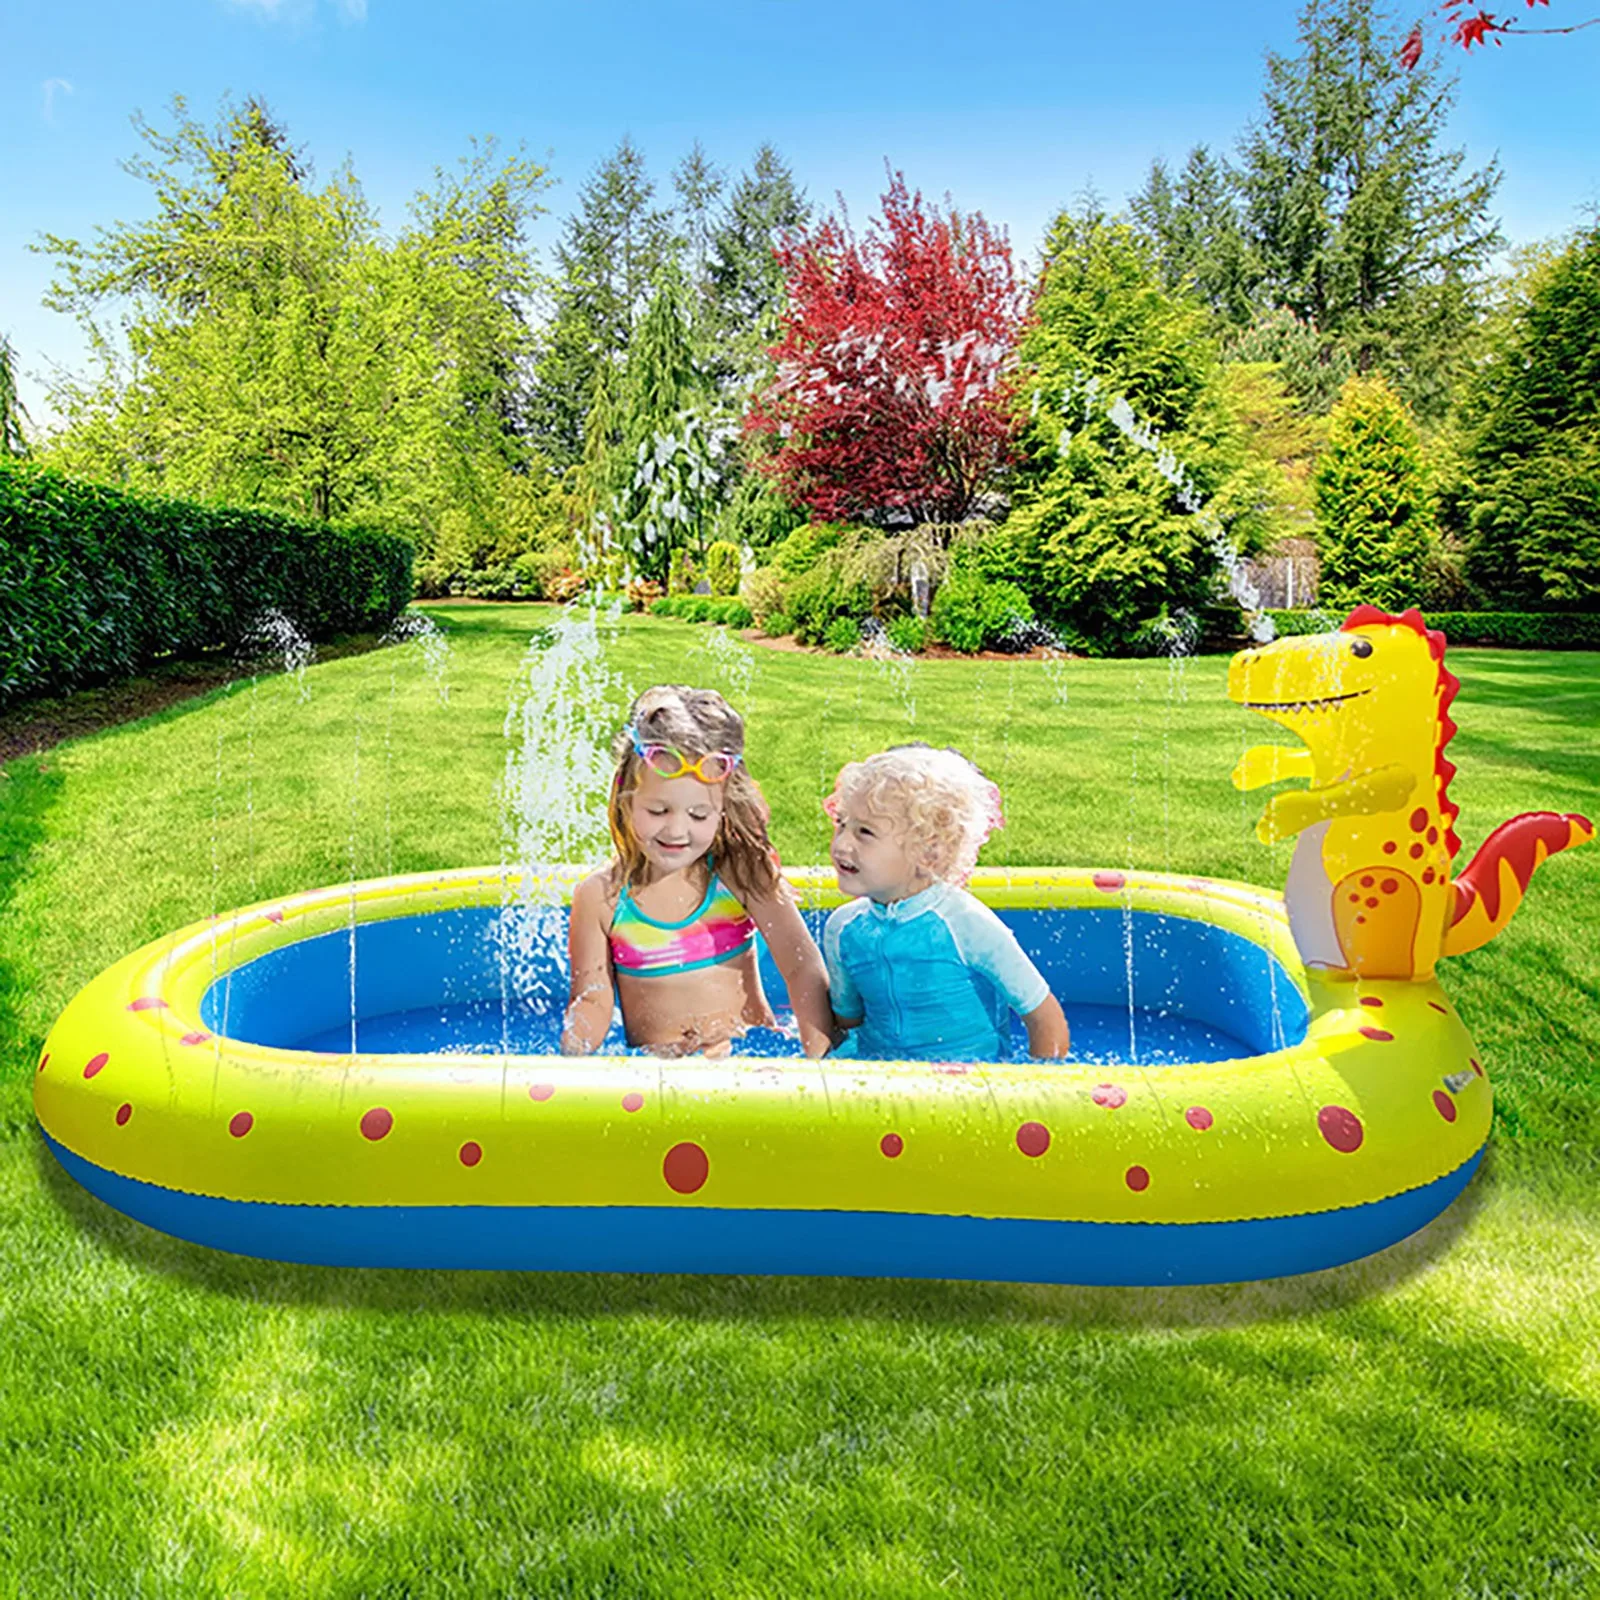 

New Inflatable Sprinkler Pool for Kids 3 in 1 Baby Cushion Outdoor Splash Pad Toddlers Children Backyard Fun Water Toys FE